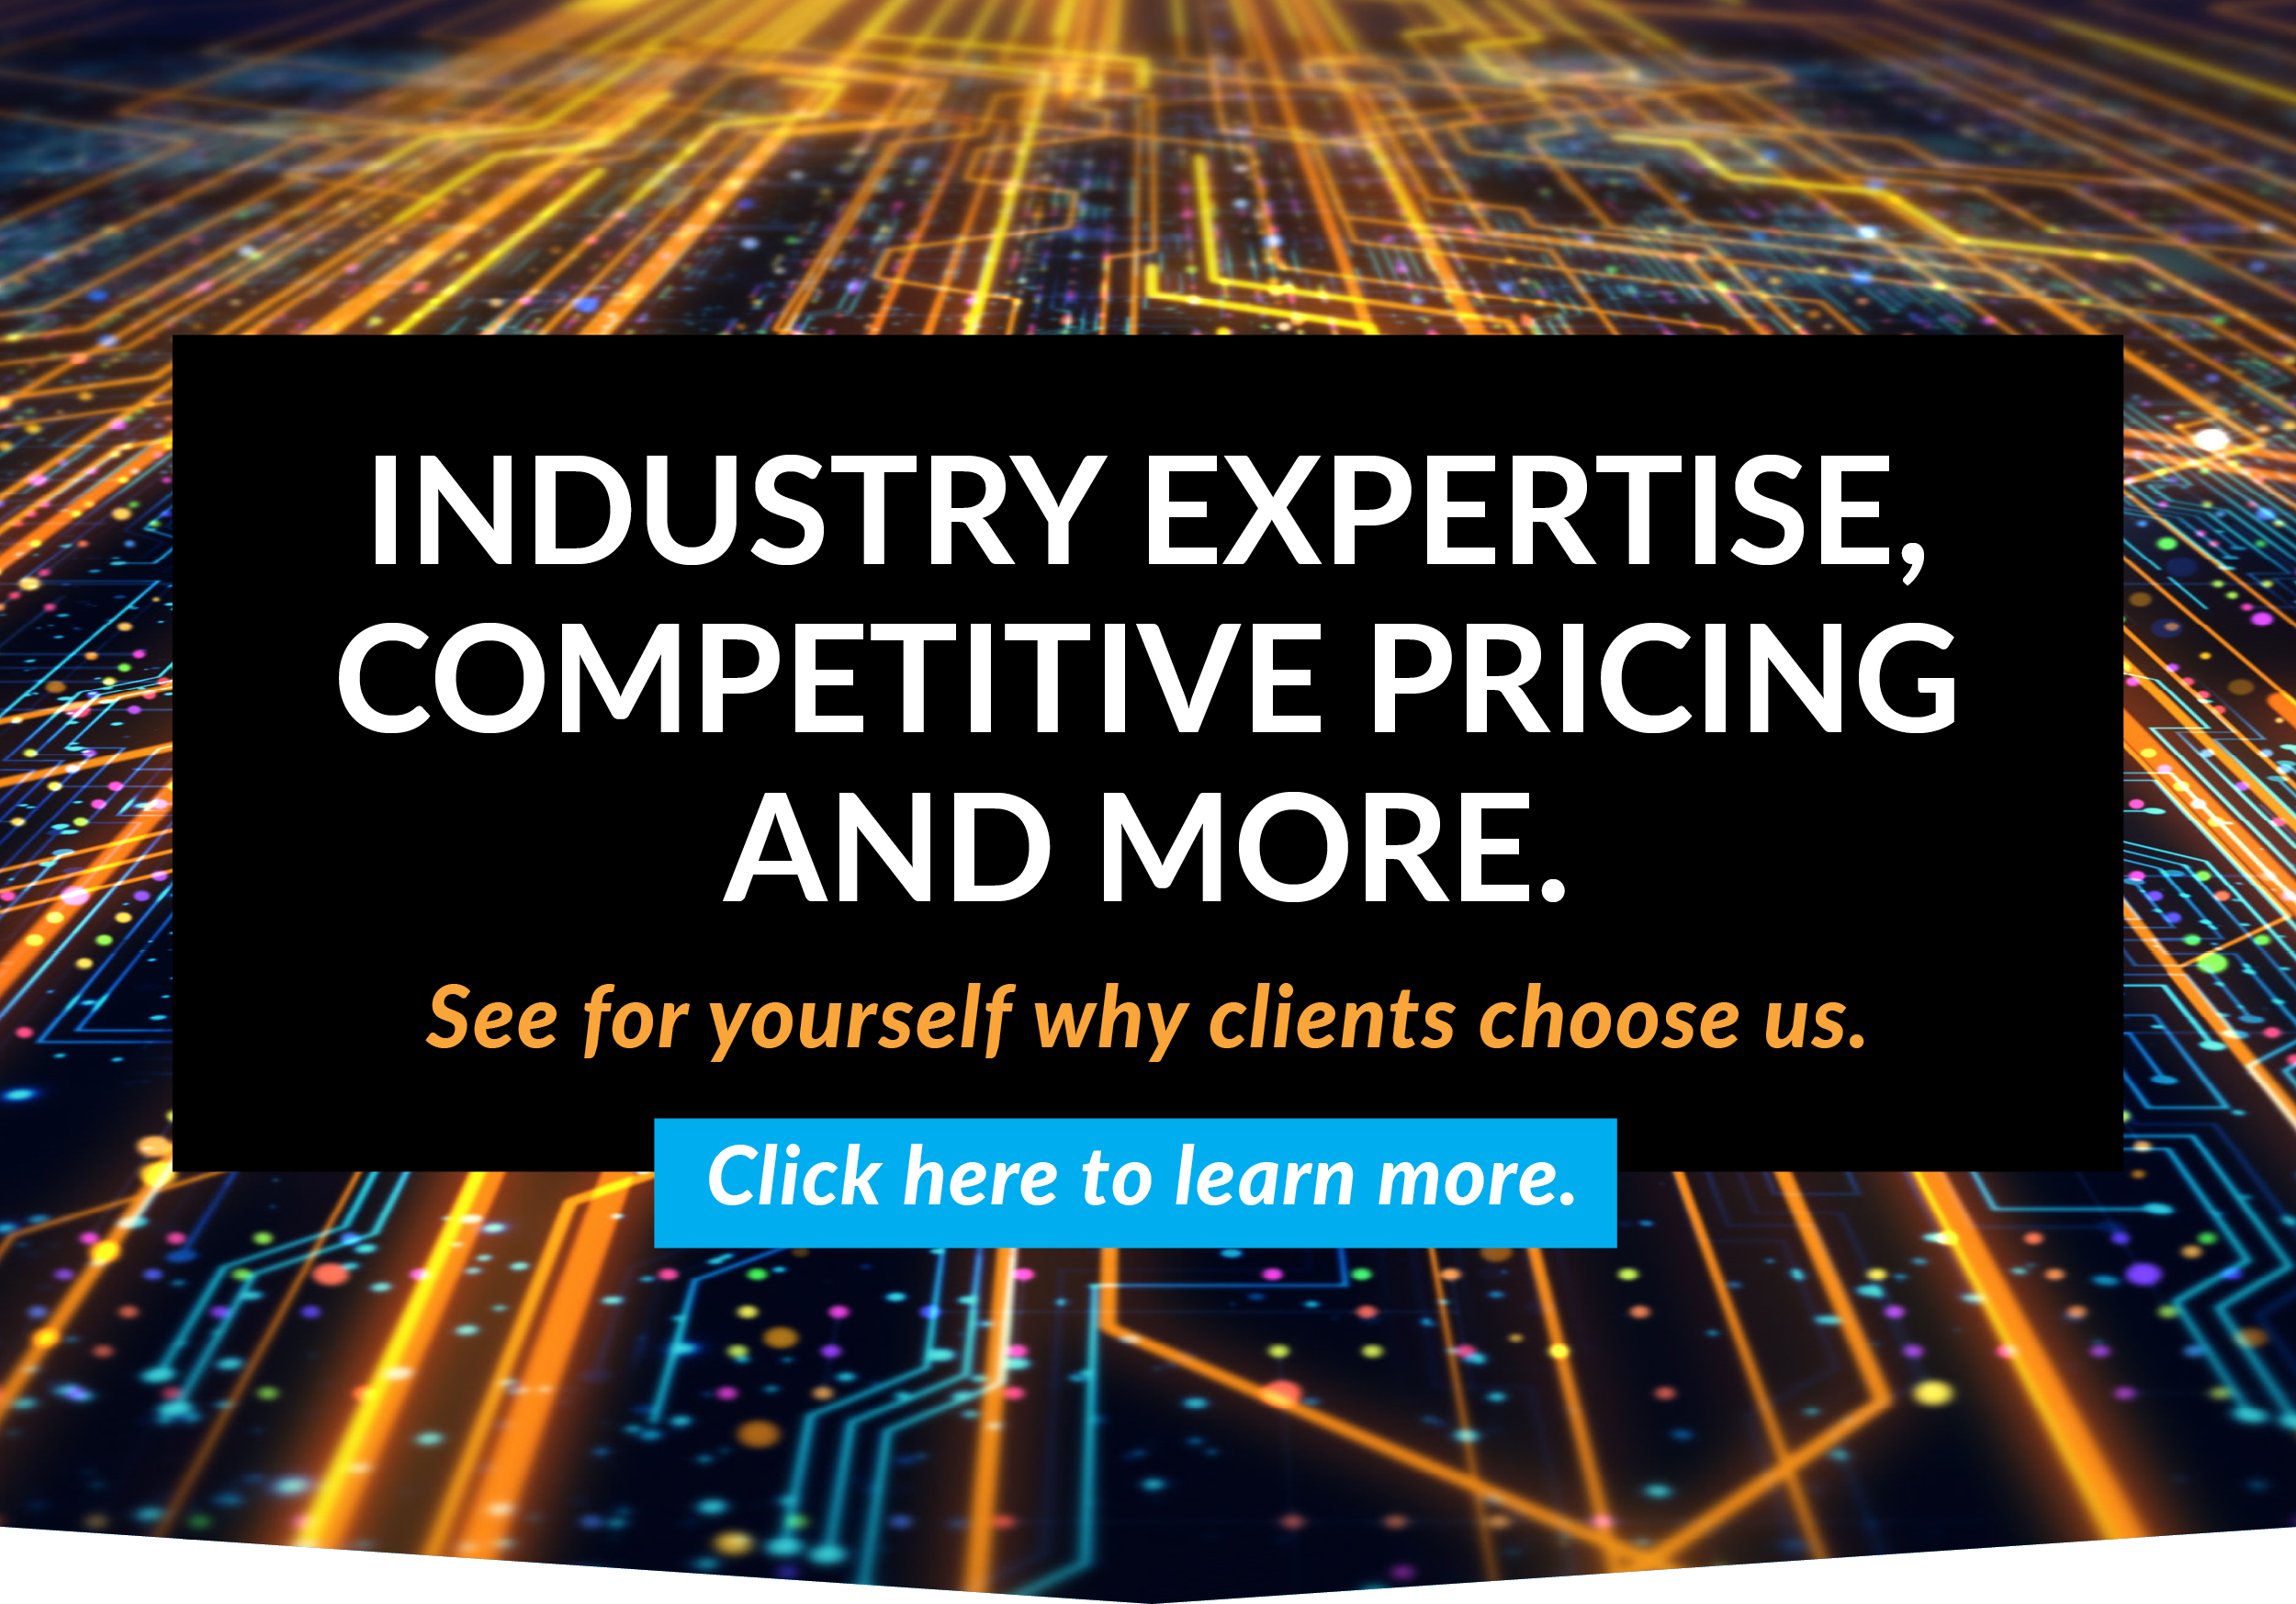 Industry Expertise, Competitive Pricing and More.